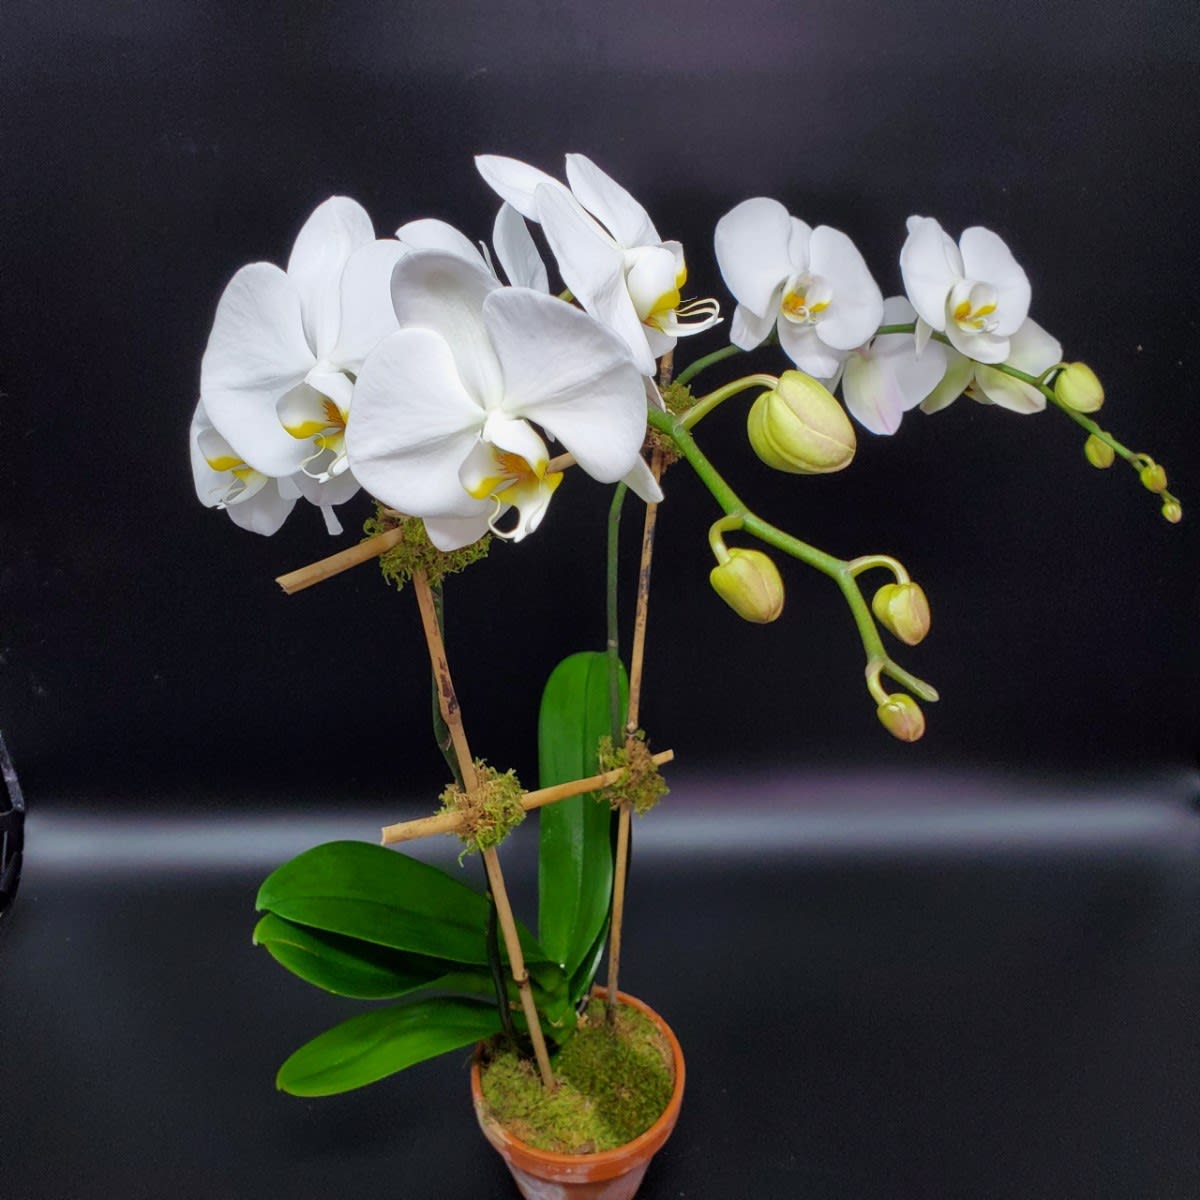 Double Stem Phalaenopsis Orchid Plant - This classic, elegant and timeless gift or personal design statement will never go out of style.  Our orchids are cultivated from Thailand roots and carefully and painstakingly grown for several years before we offer them to our clients.  This allows for a hearty and resistant plant.  Designed in terracotta pots with moss, bamboo and natural raffia these stunning white blooms will rebloom approximately every 3 to 7 months with proper conditions and care. Blooms can last up to four weeks. The orchid here is pictured in 3/4 bloom - our orchids will usually be delivered 1/4 to 3/4 of the way in bloom.